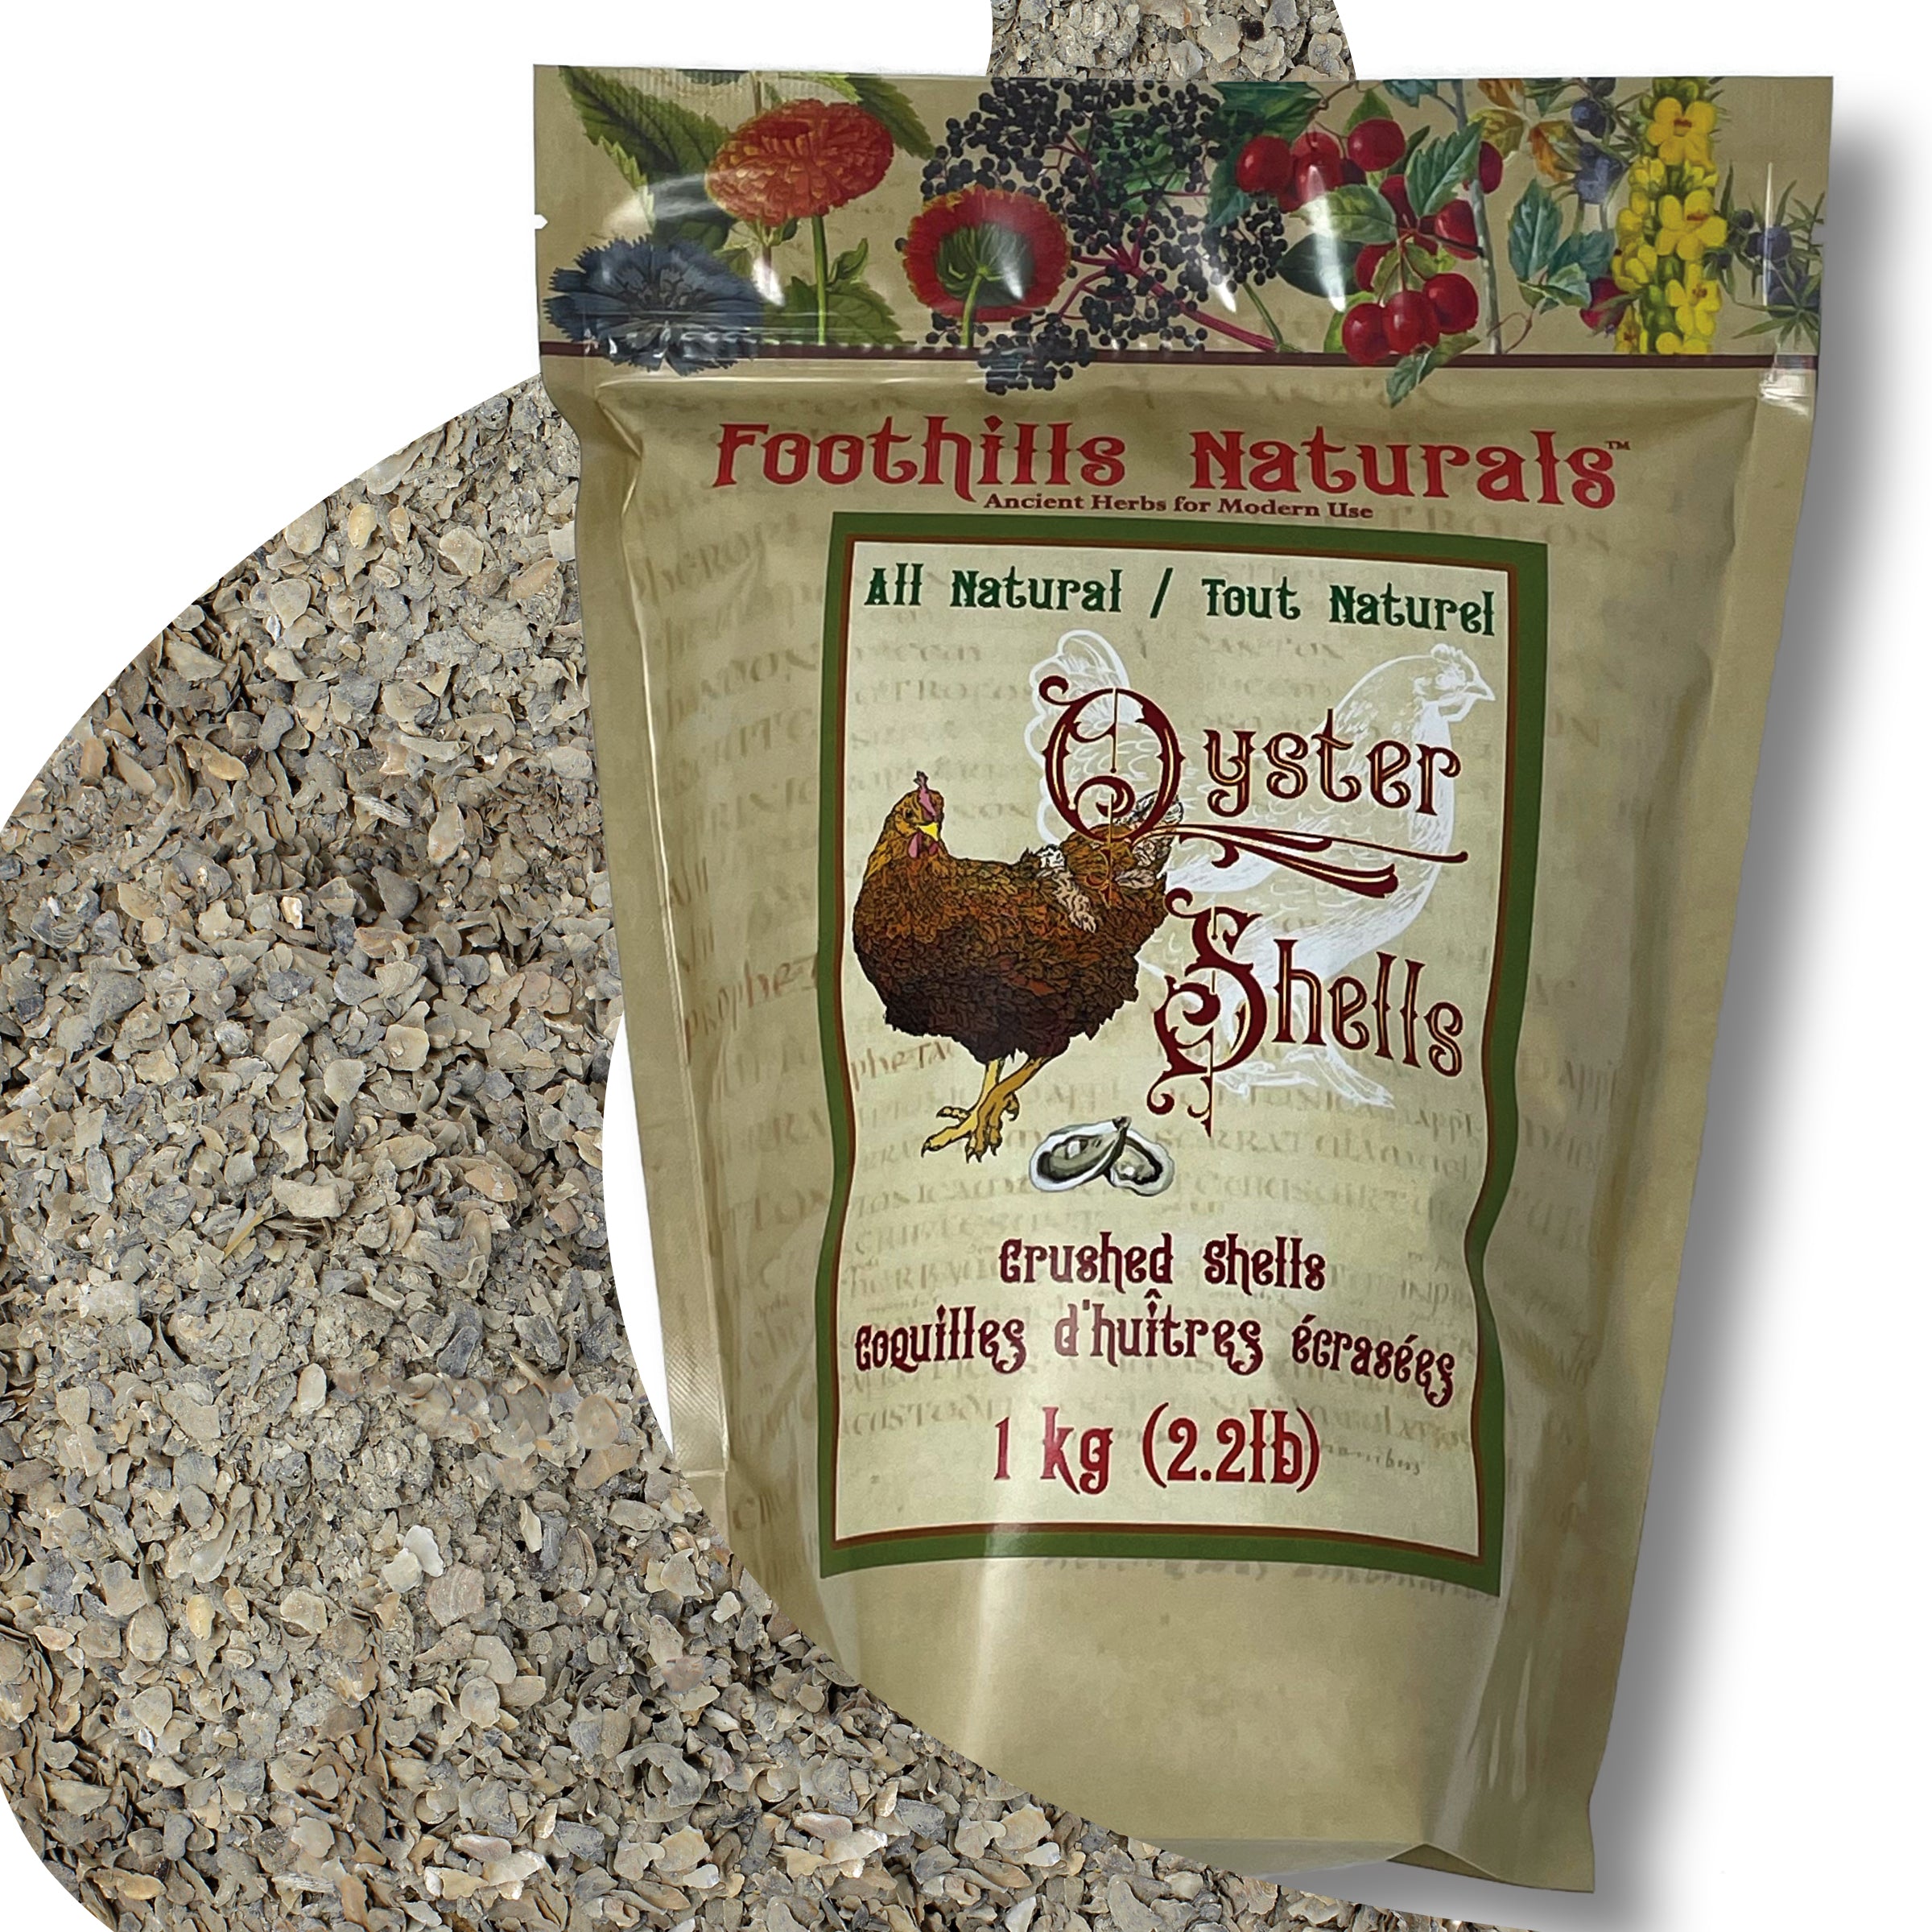 Oyster Shells Crushed - 1 kg (2.2 lb) Natural, Nothing Added | Foothills Naturals Canada | Ancient Herbs for Modern Use